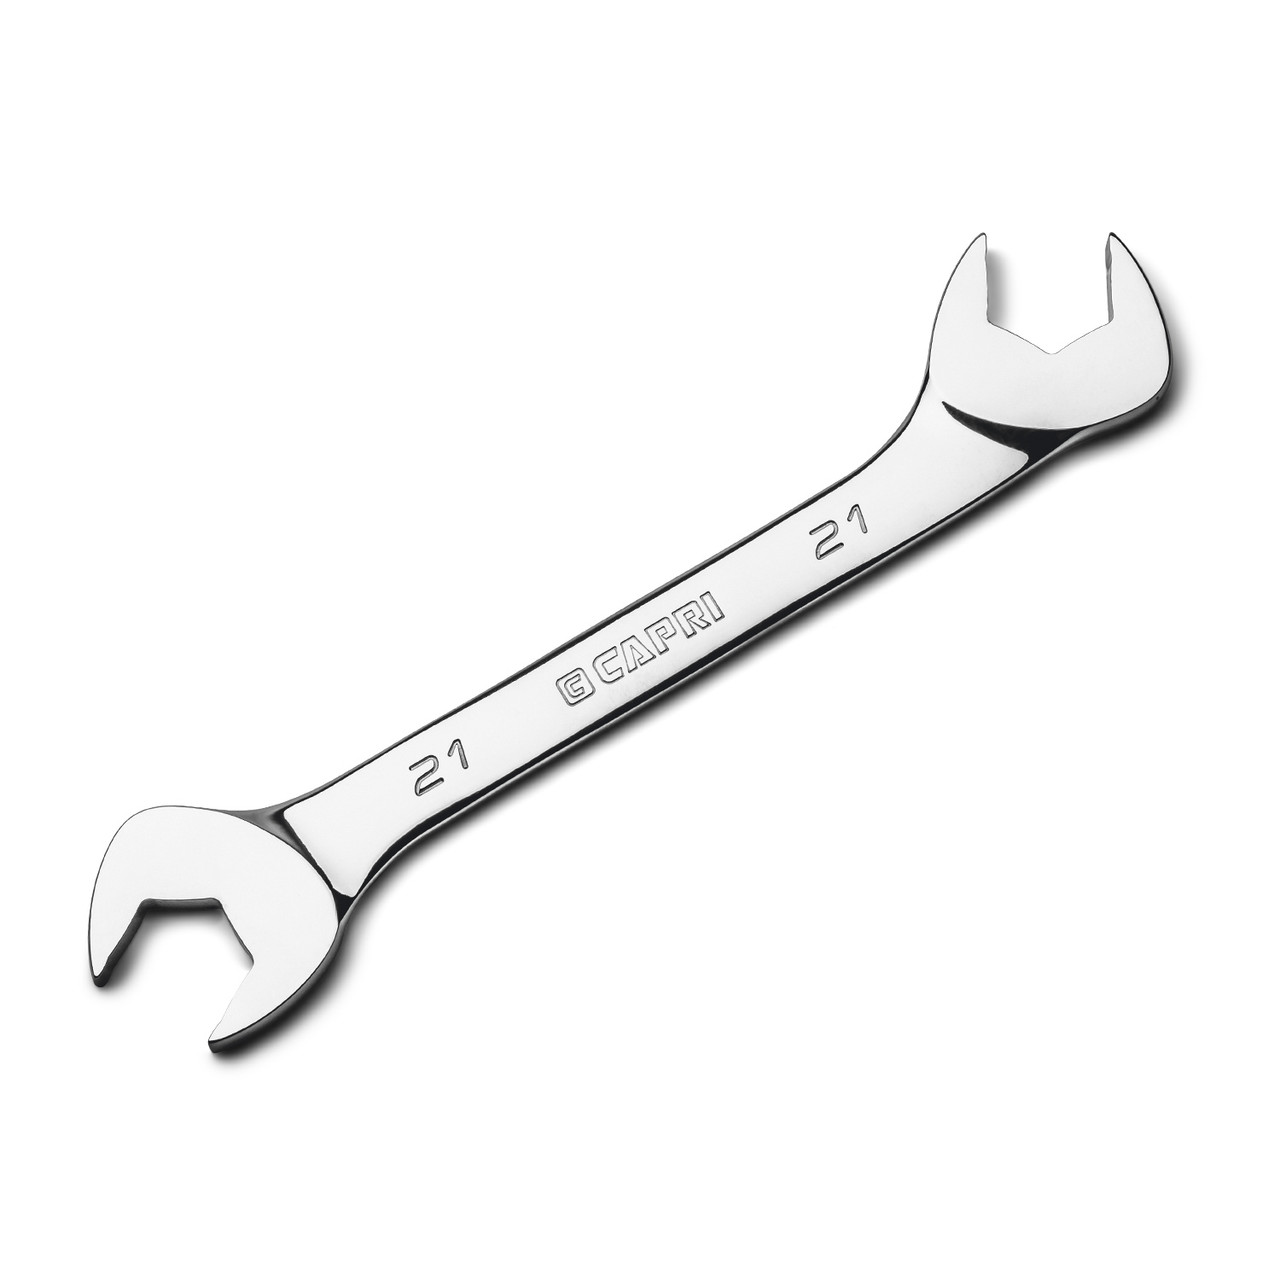 Capri Tools 21 mm Angle Open End Wrench, 30° and 60° angles, Metric